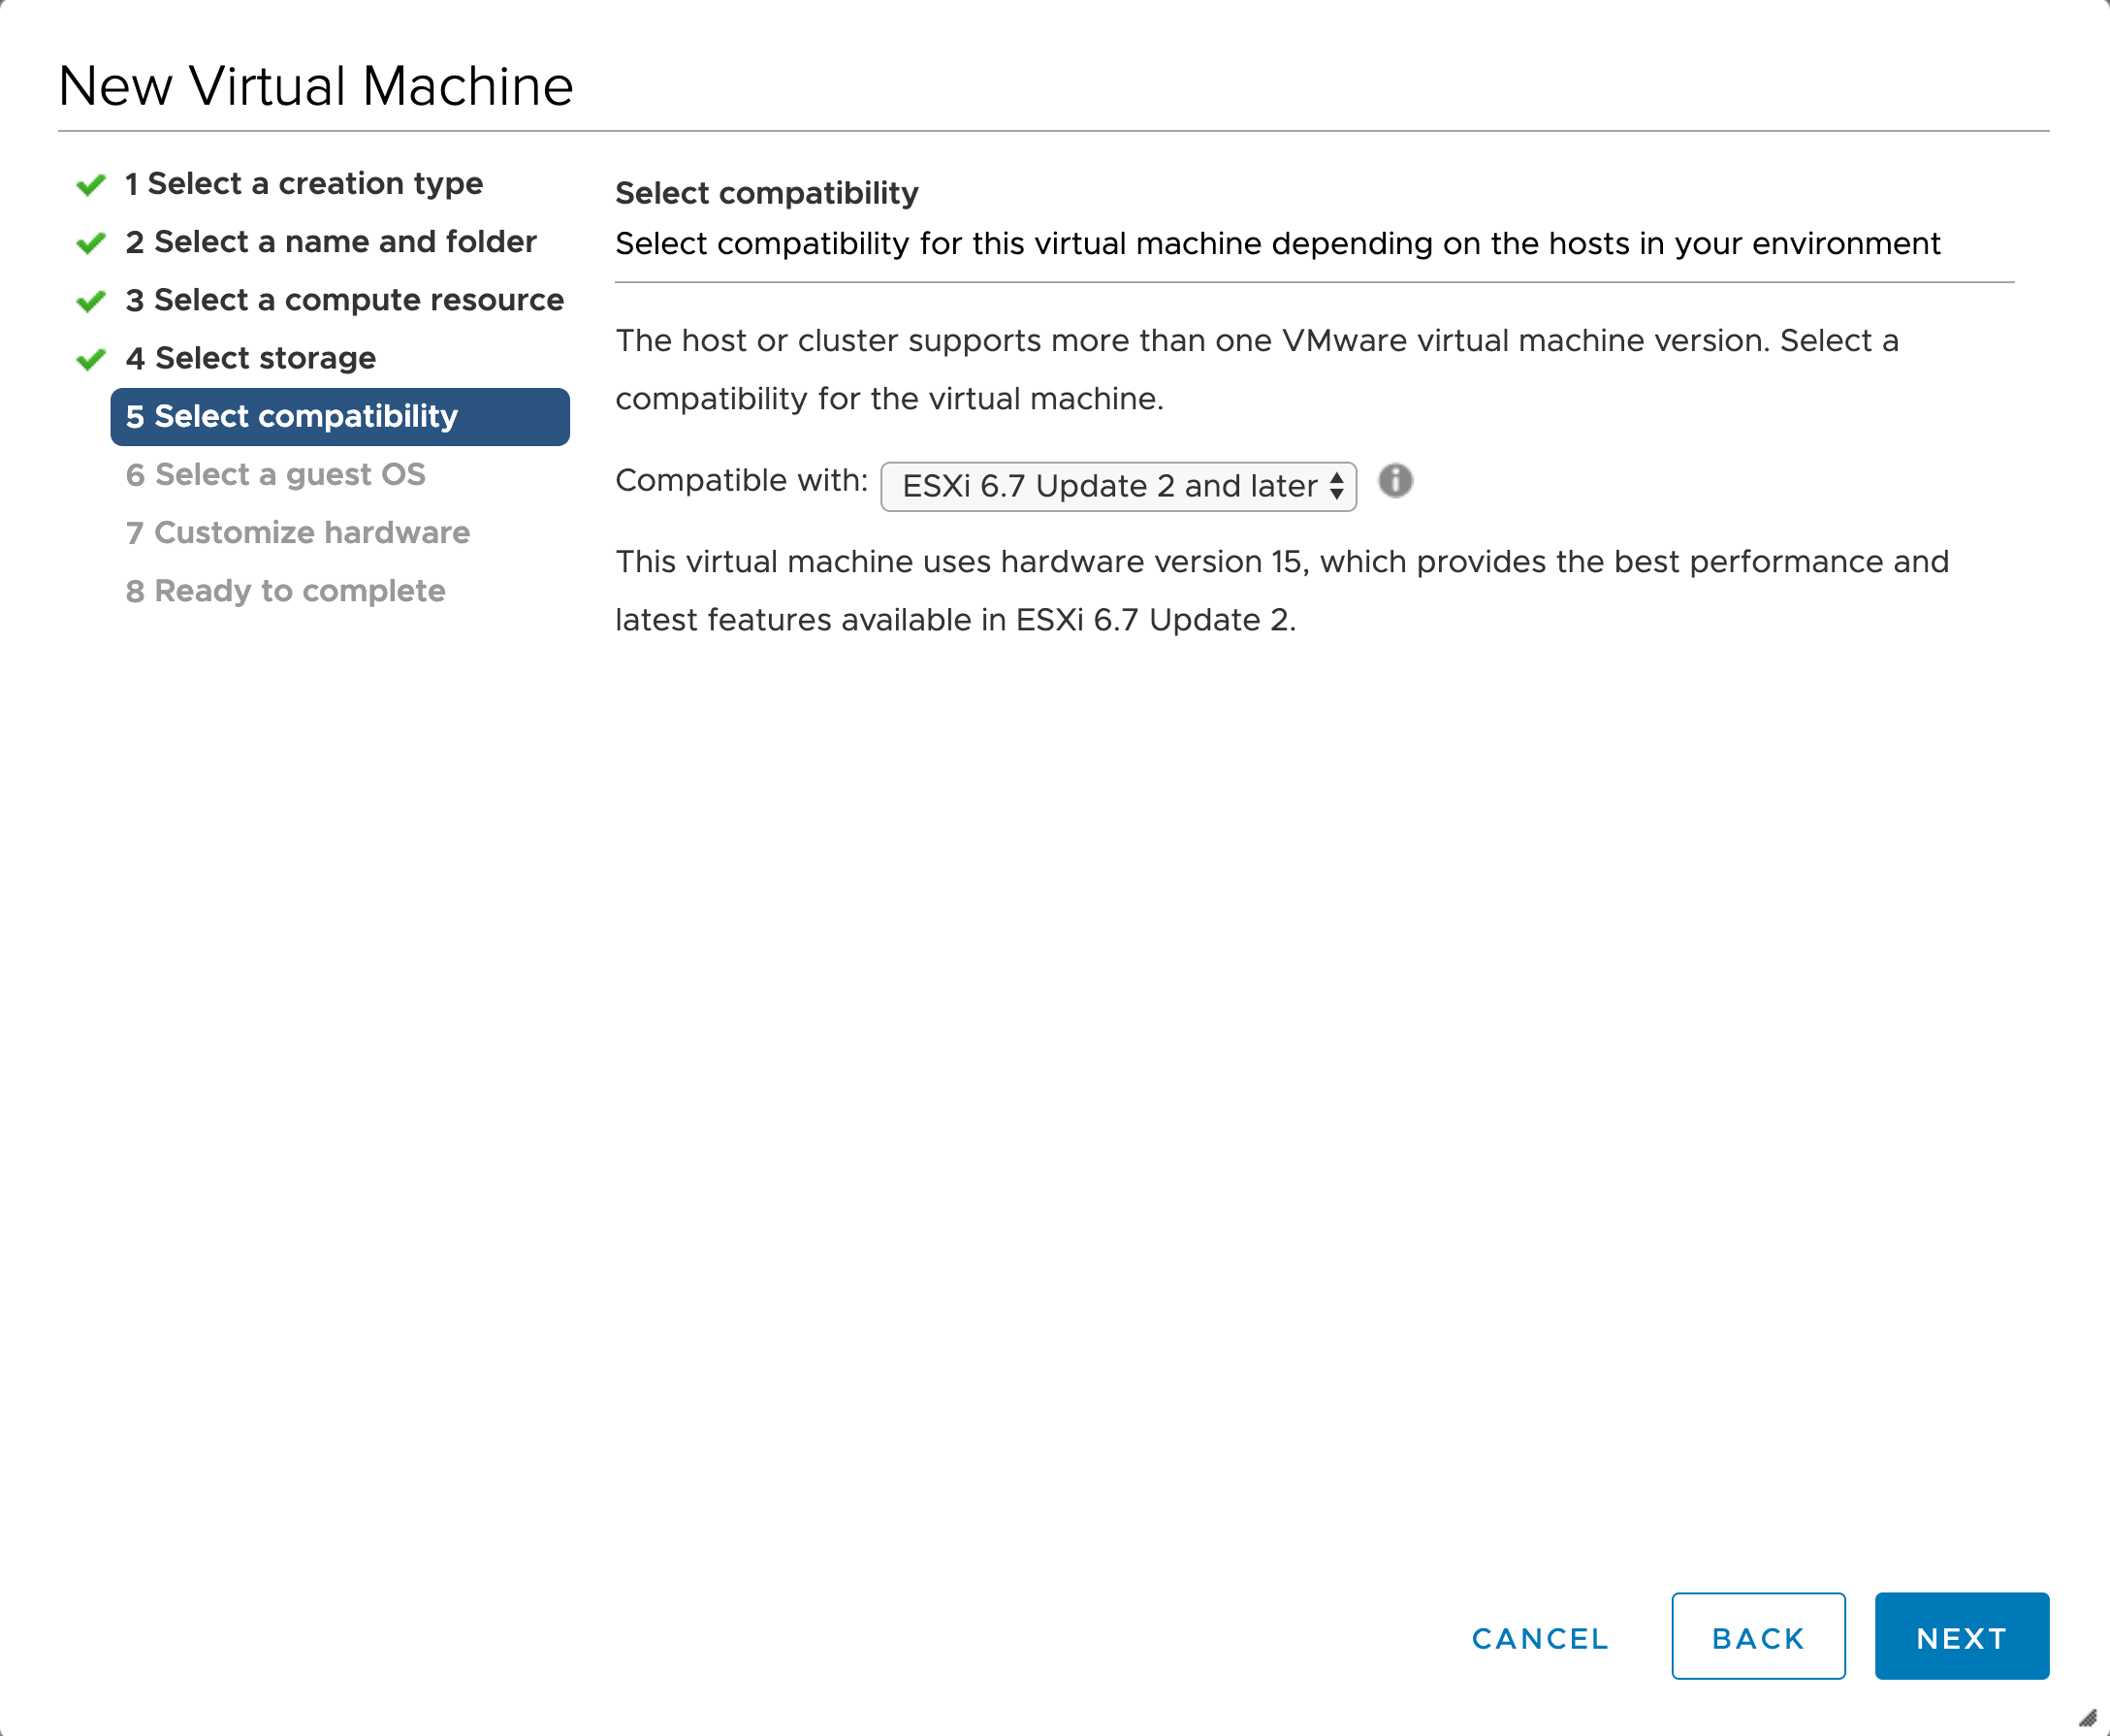 Screenshot of the "Select compatibility" section of the New Virtual Machine creation pane.